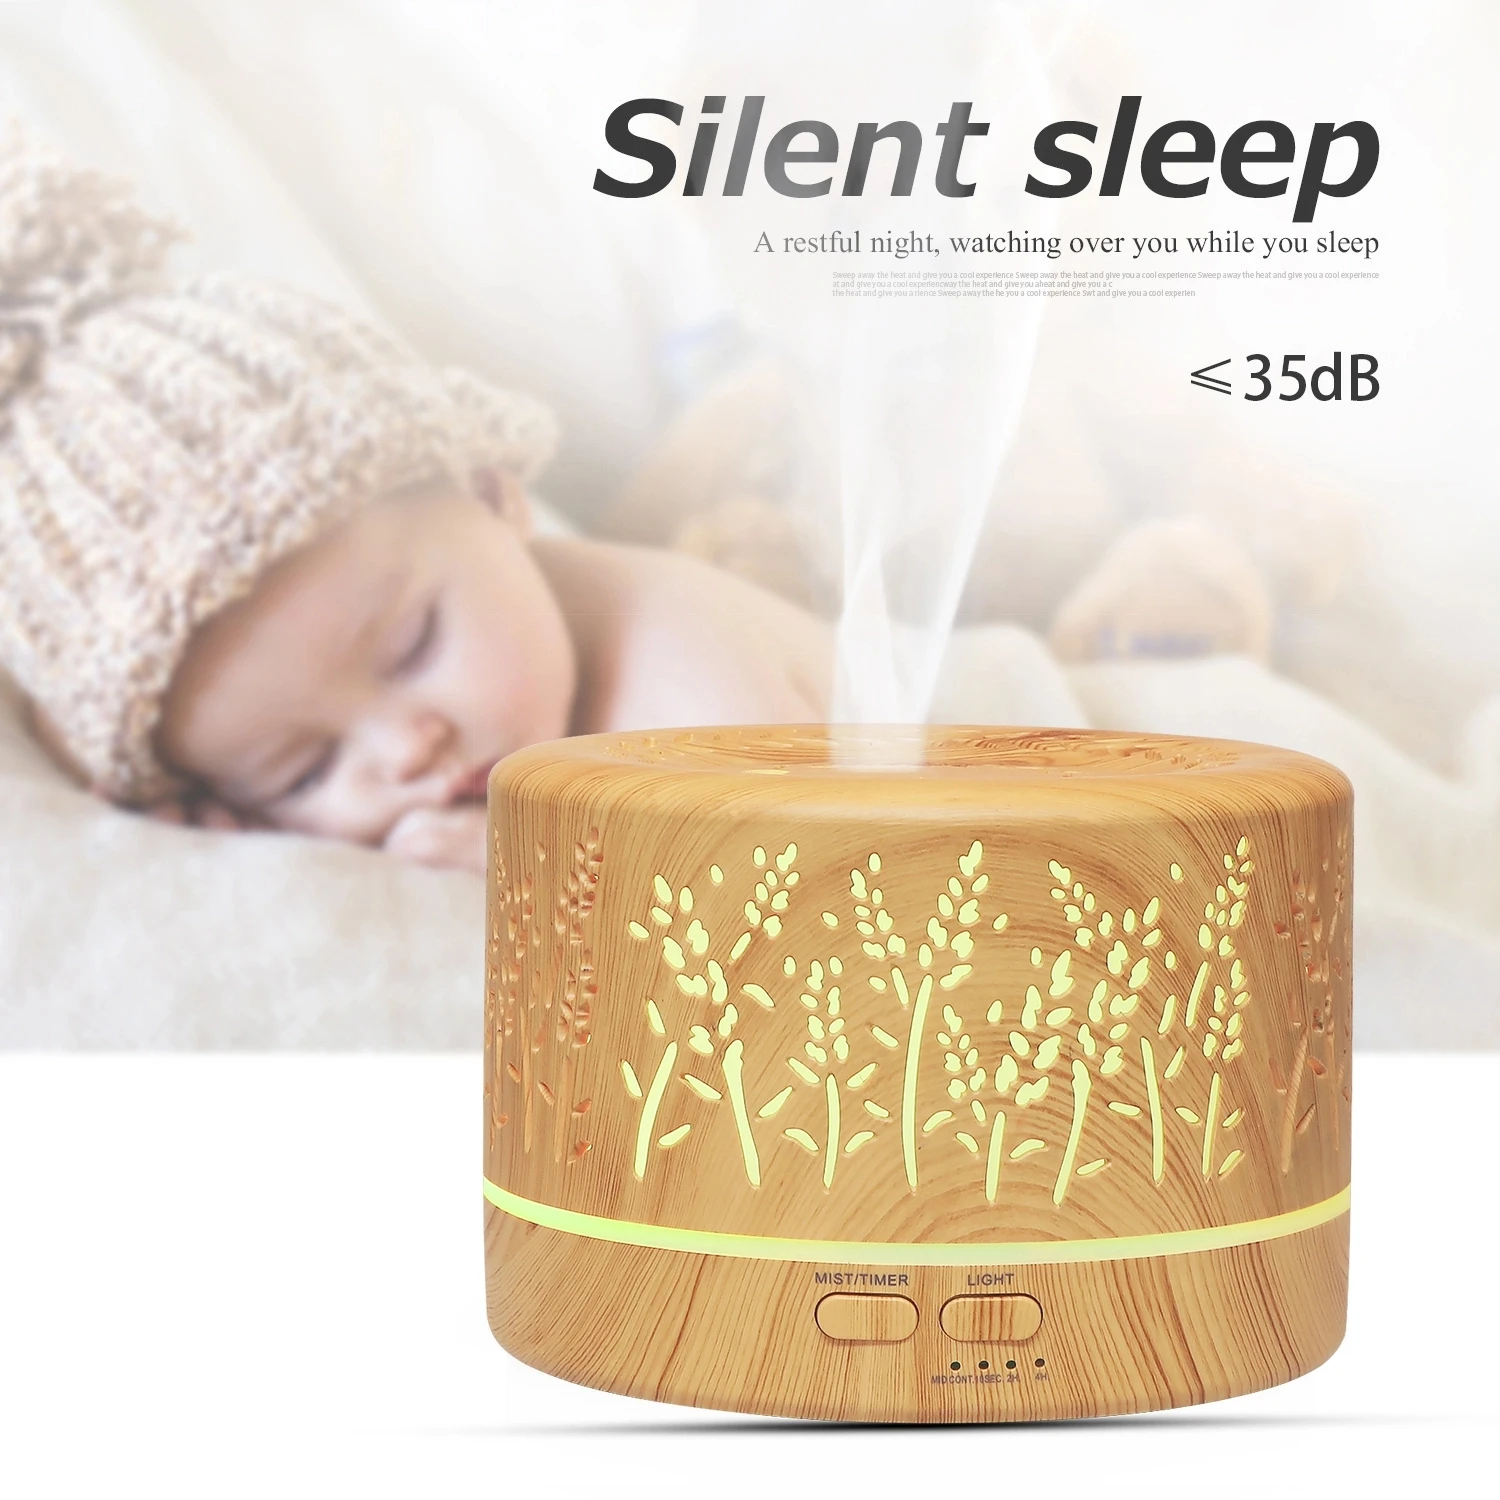 Hot Sale Gift 700ml Ultrasonic Remote Control Lavender Bamboo Art Hollow Humidifier Fragrance oil Aroma Diffuser With Led Light лэтуаль гидрогелевая маска для лица с лепестками лаванды purity lavender hydrogel face mask with lavender petals